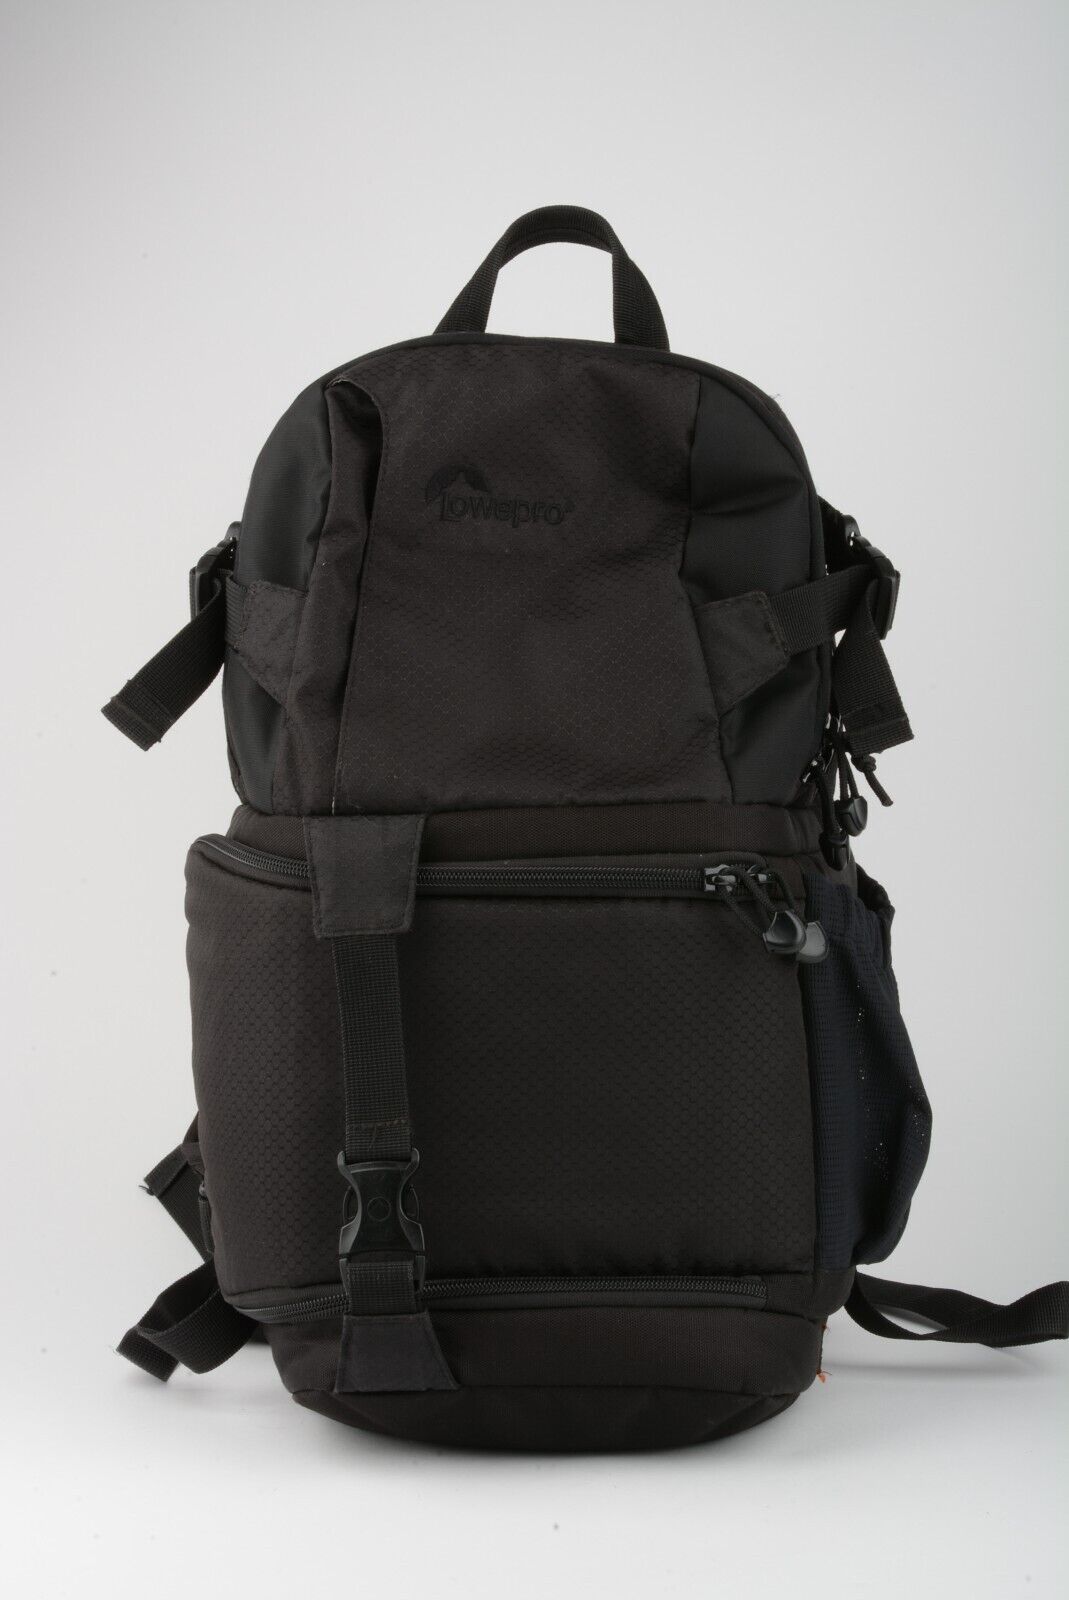 EXC++ LOWEPRO VIDEO PACK 150 AW BACKPACK, VERY CLEAN, GENTLY USED